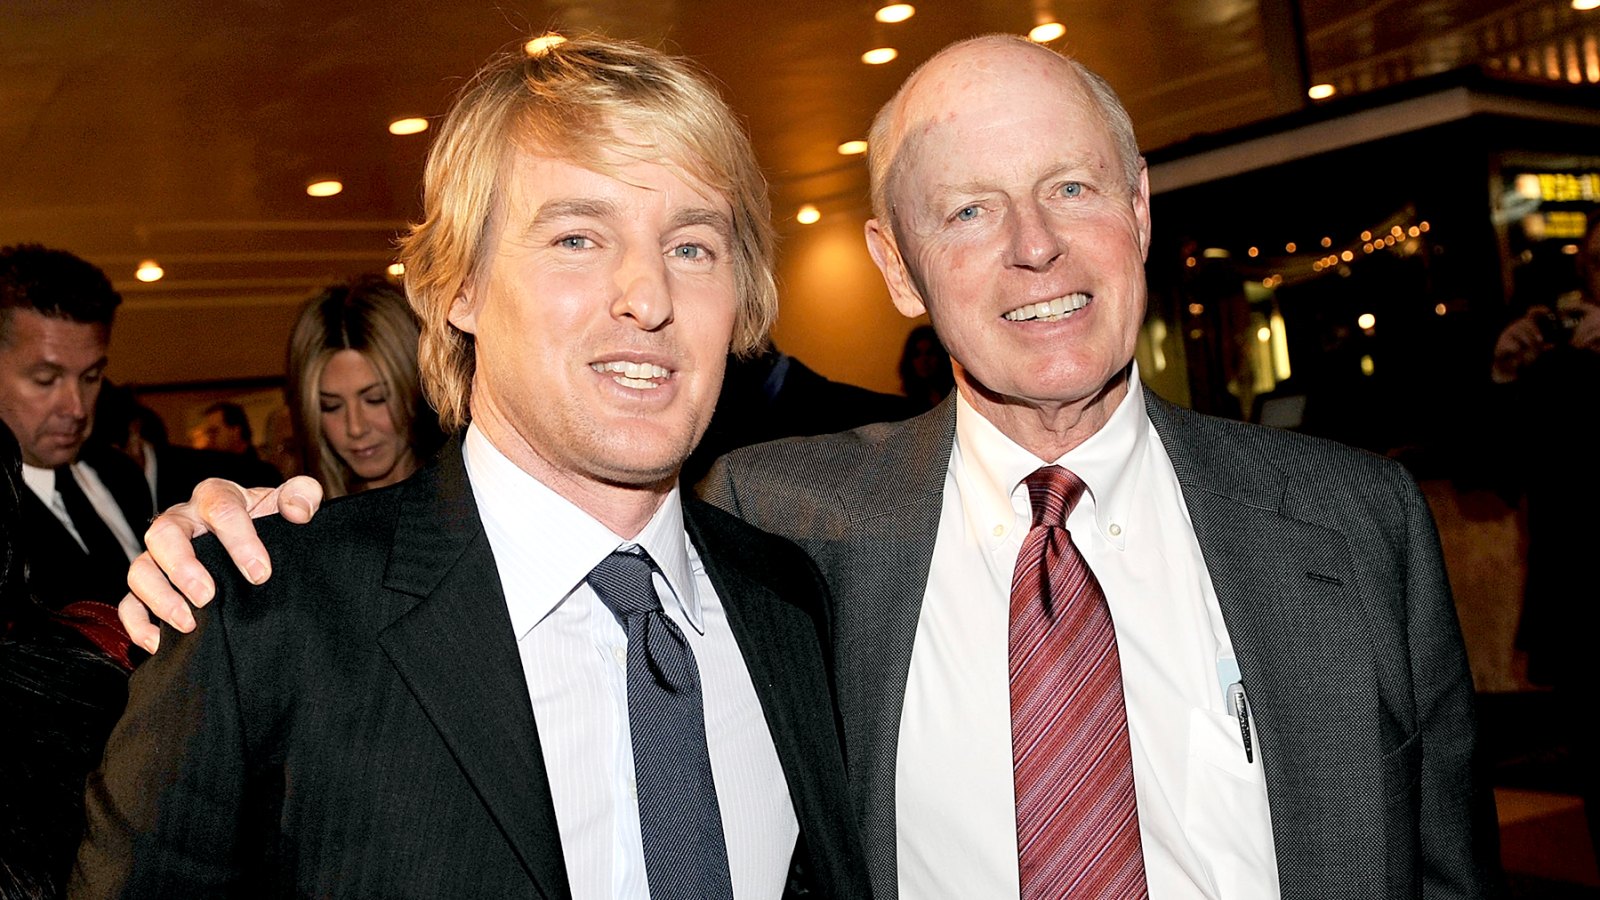 Owen Wilson and his father Robert arrive at the premiere of 20th Century Fox's "Marley & Me" held at the Mann Village Theater on December 11, 2008 in Westwood, California.